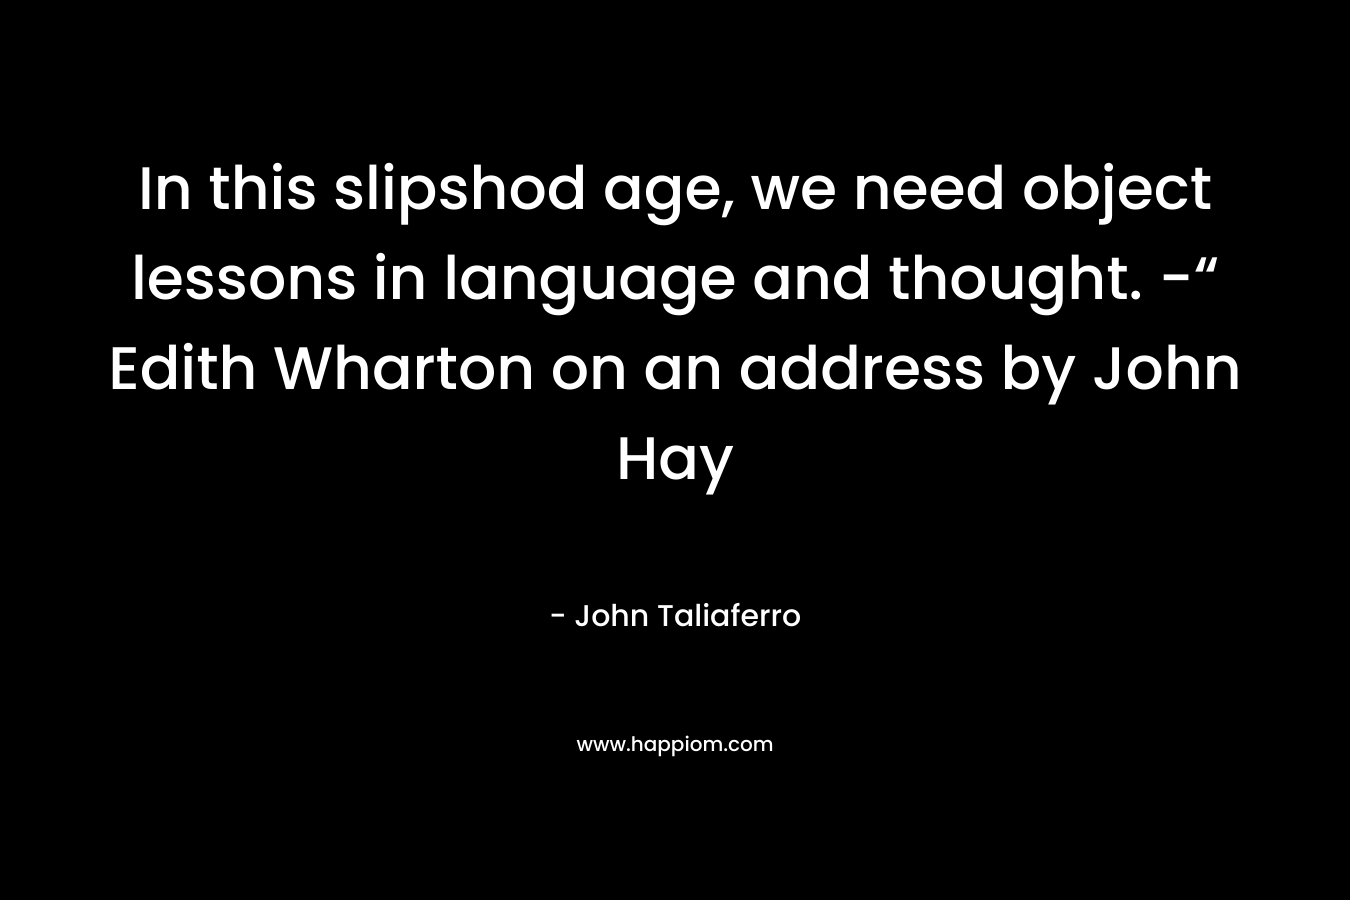 In this slipshod age, we need object lessons in language and thought. -“ Edith Wharton on an address by John Hay